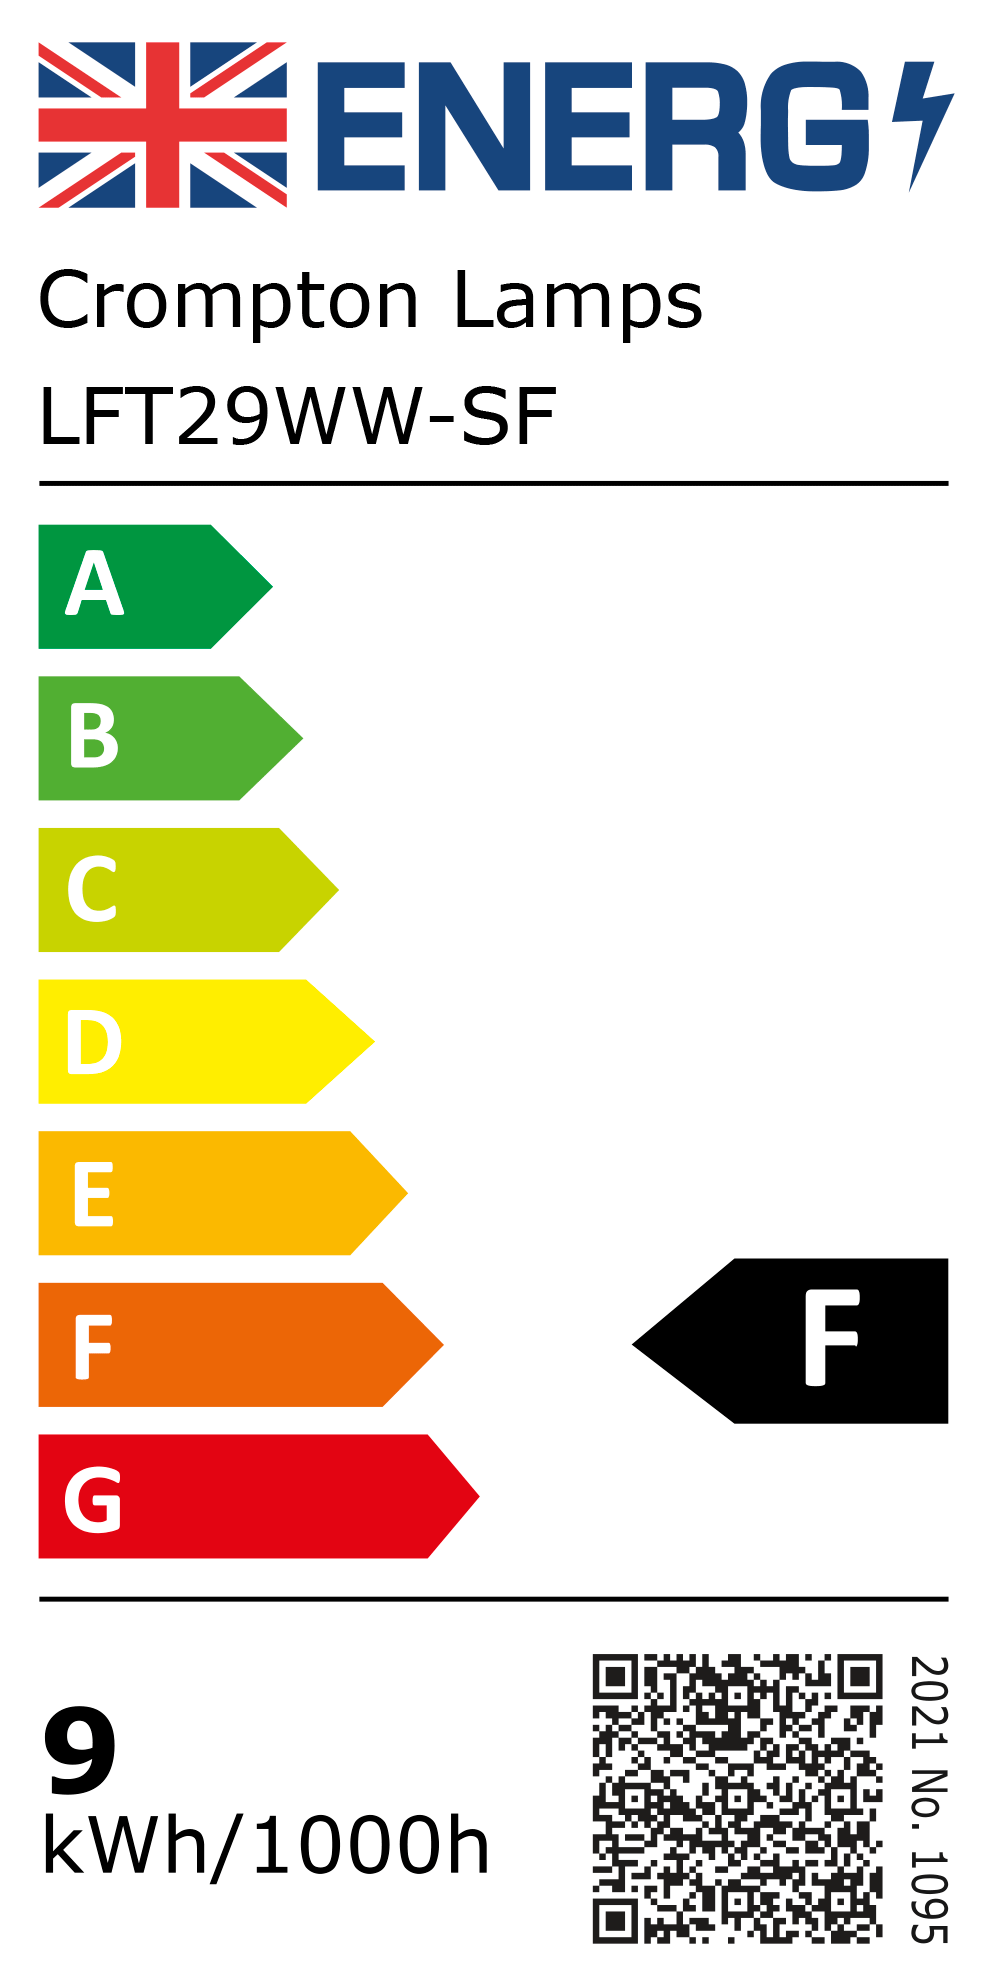 New 2021 Energy Rating Label: Stock Code LFT29WW-SF